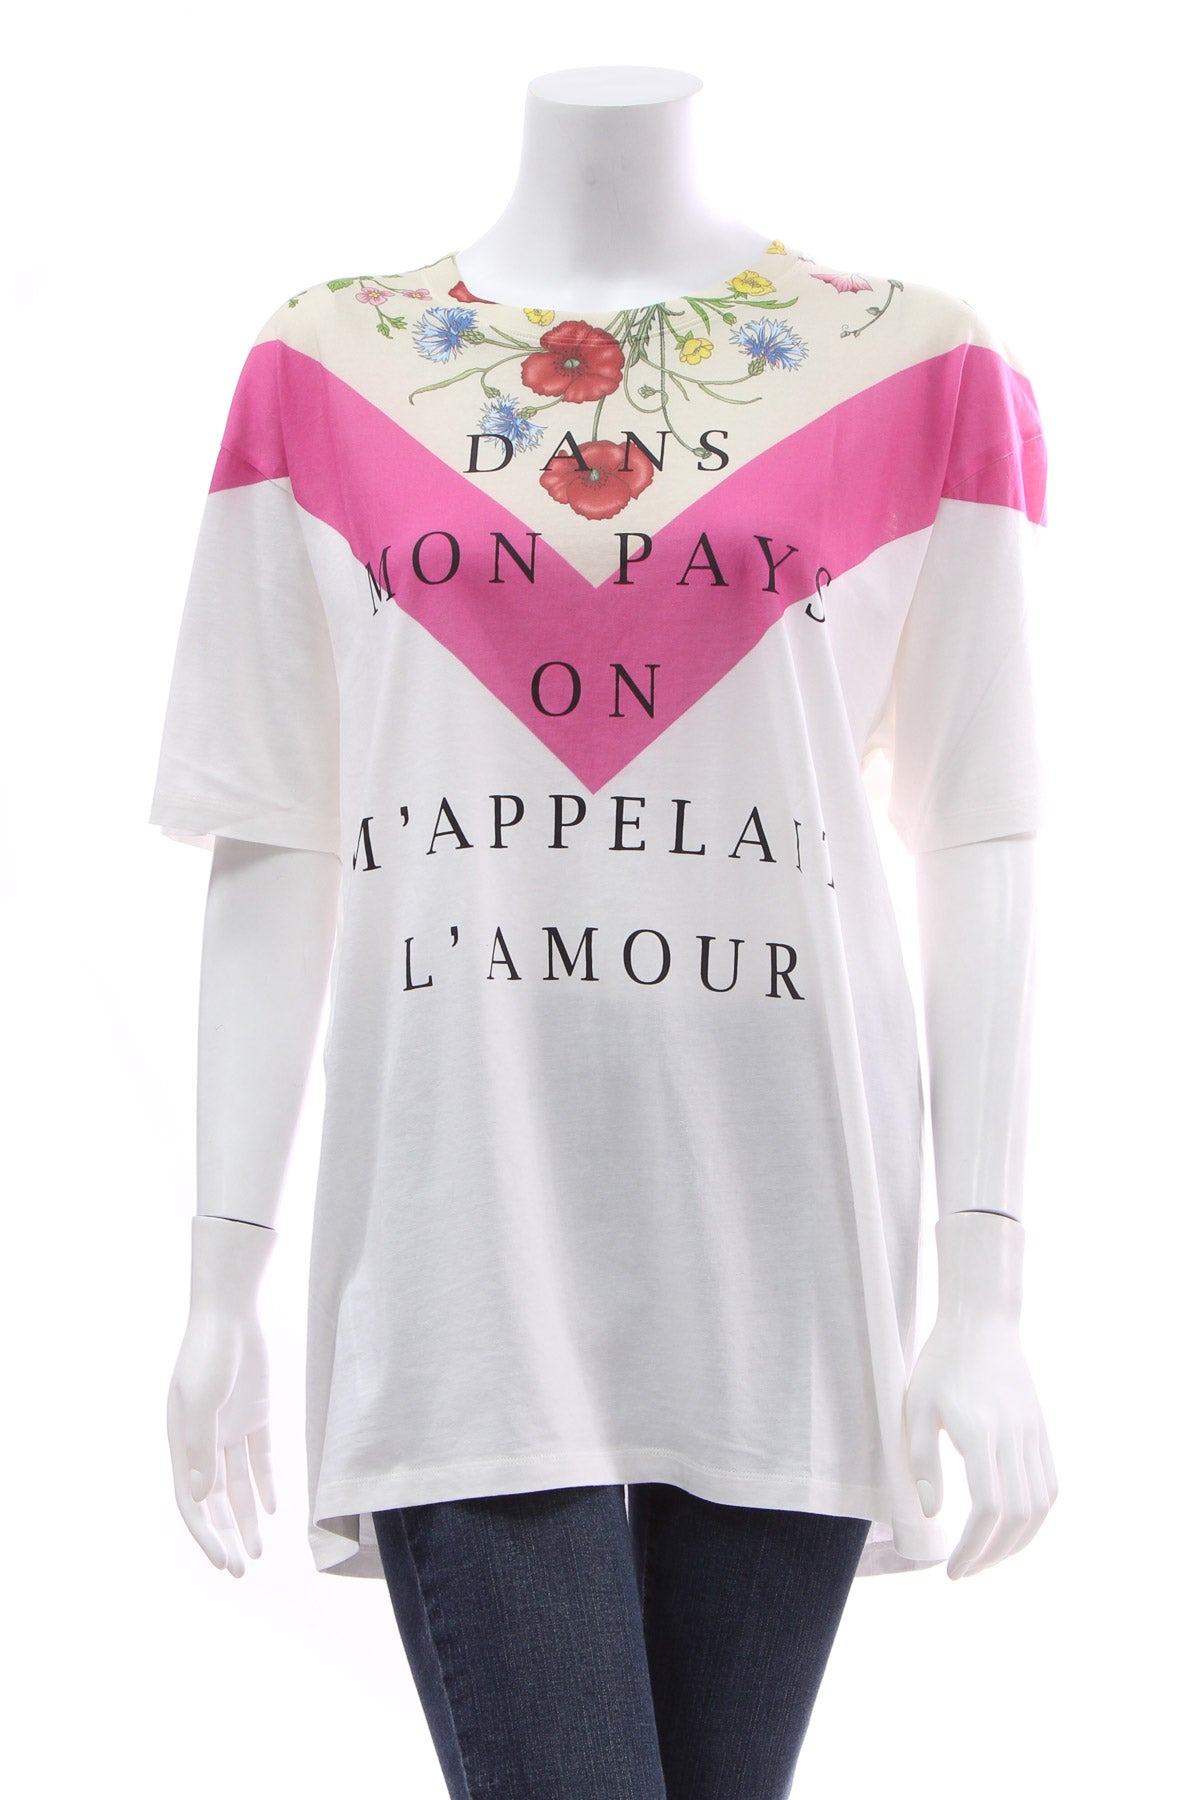 Charlotte Bronte desillusion lysere Gucci Floral Printed T-Shirt - Size S - Couture USA